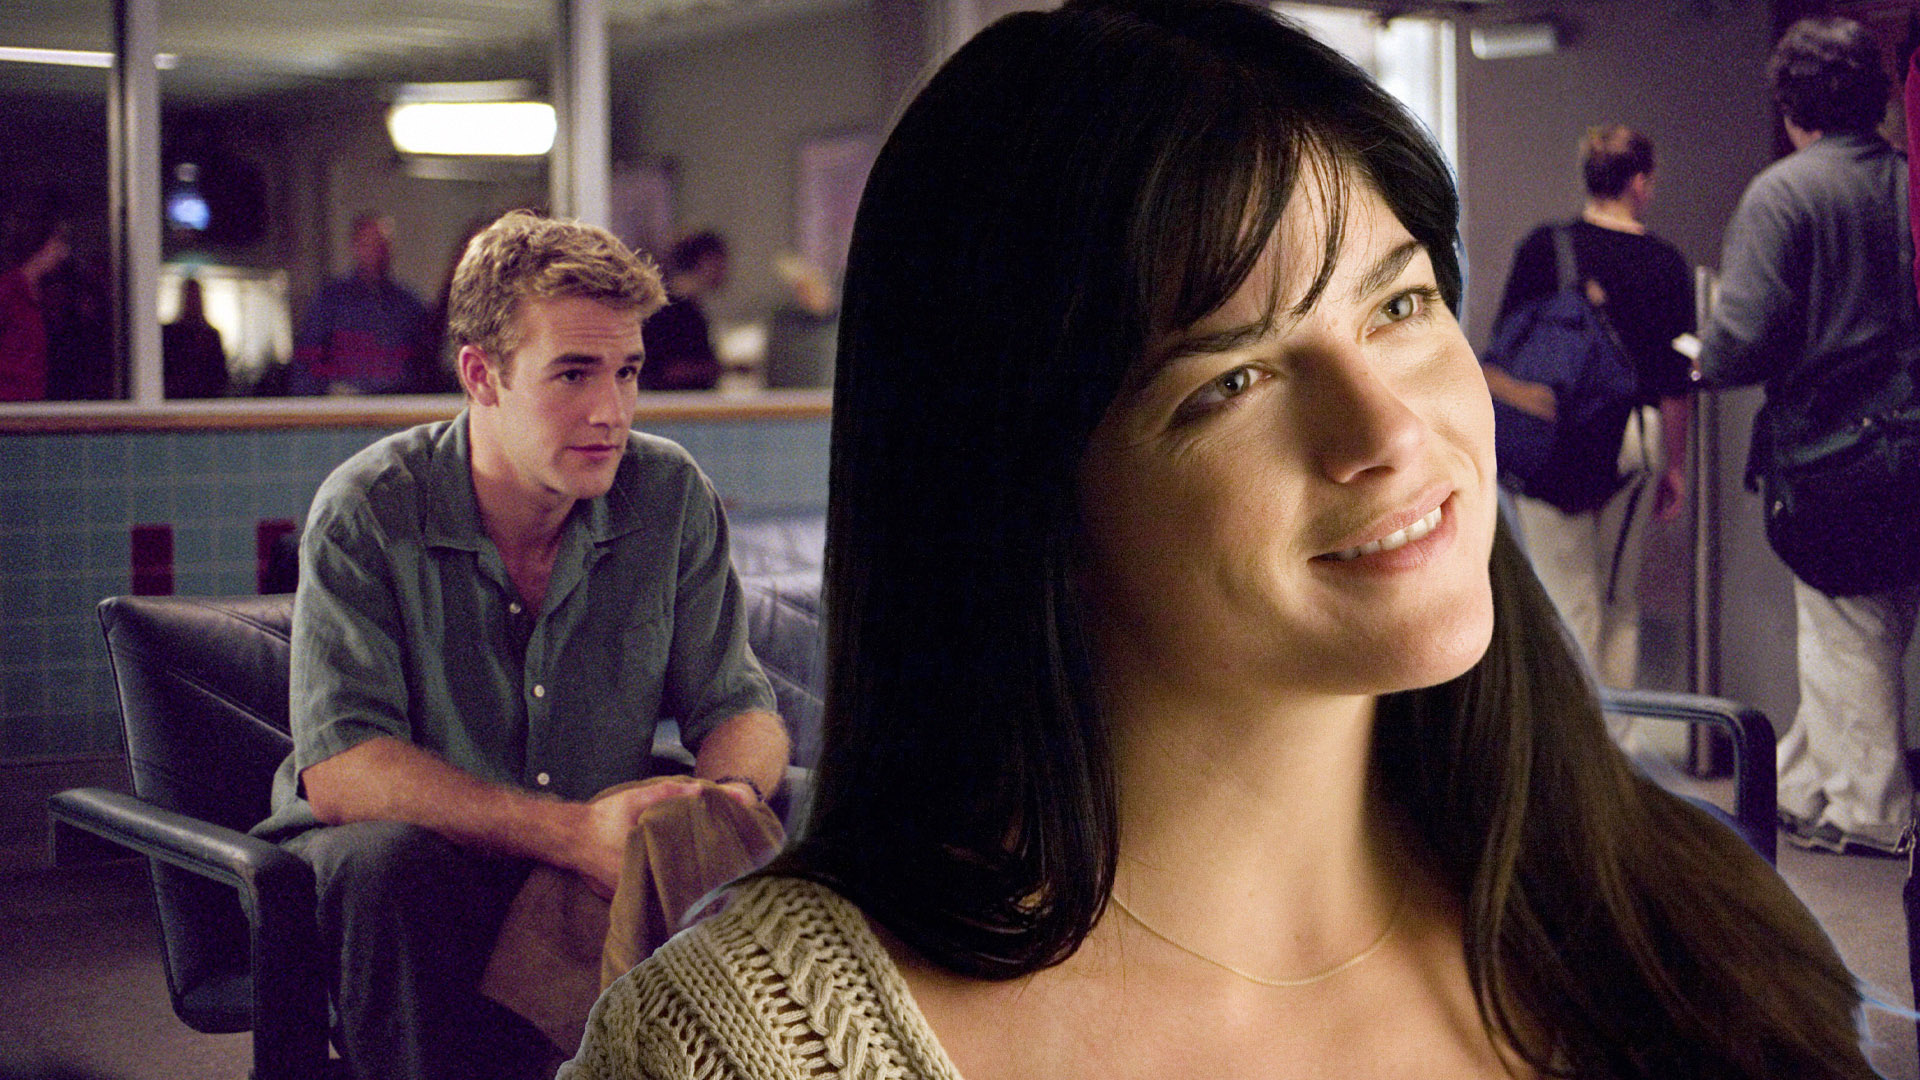 Selma Blair Lost a Role on Dawson's Creek to Katie Holmes' Last-minute Audition